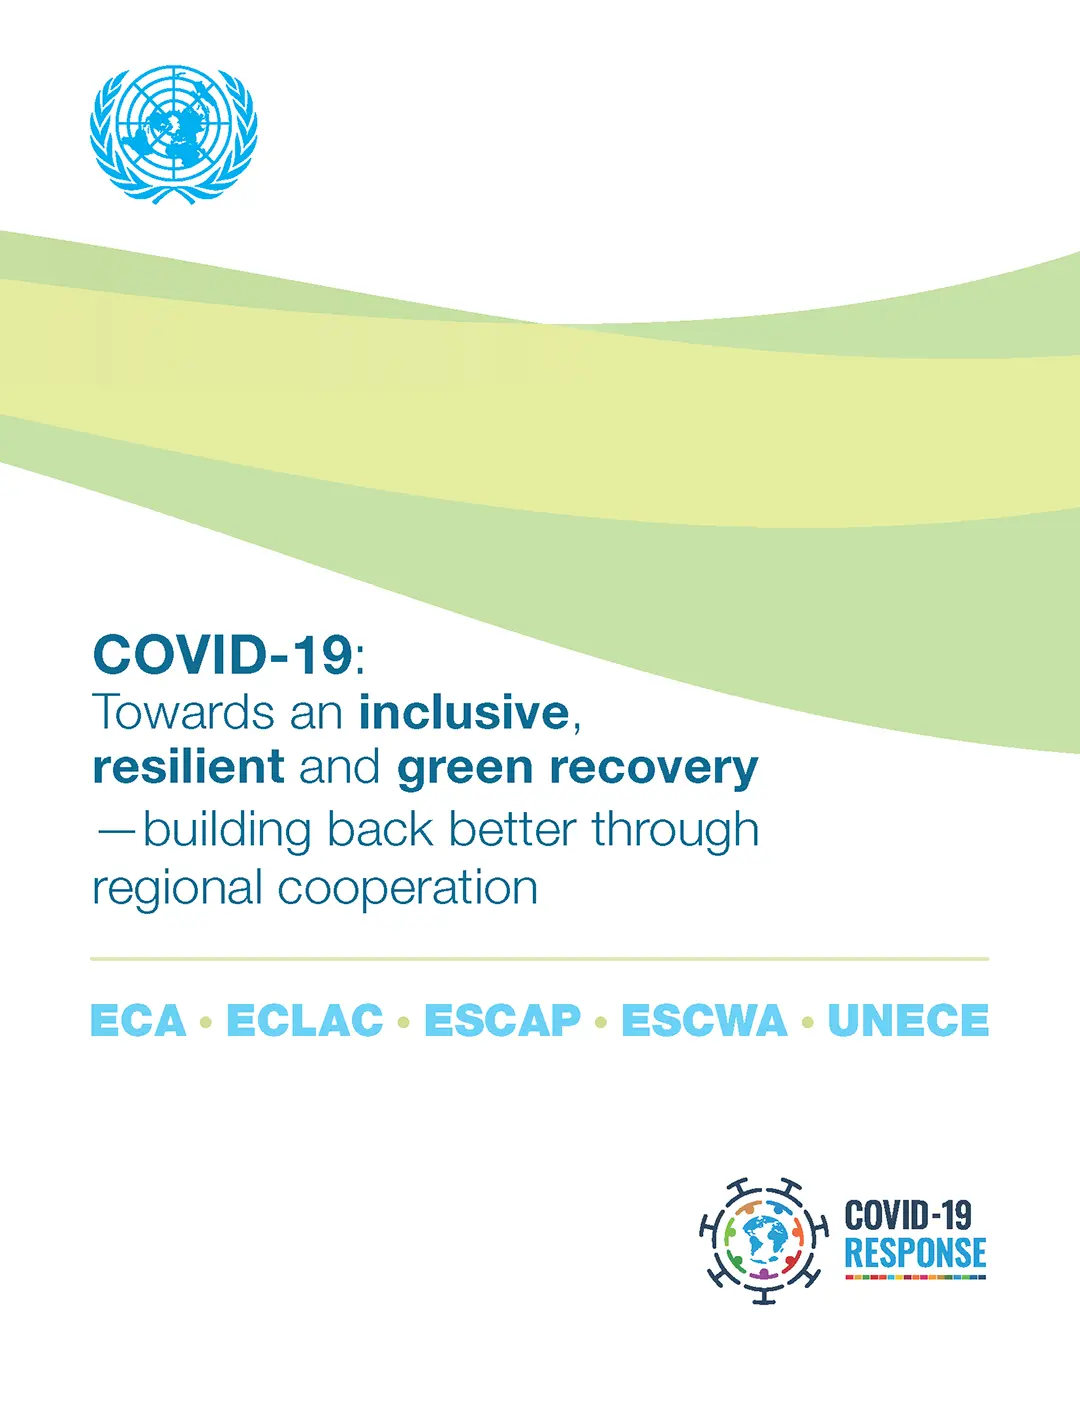 COVID-19 - Towards an inclusive, resilient and green recovery